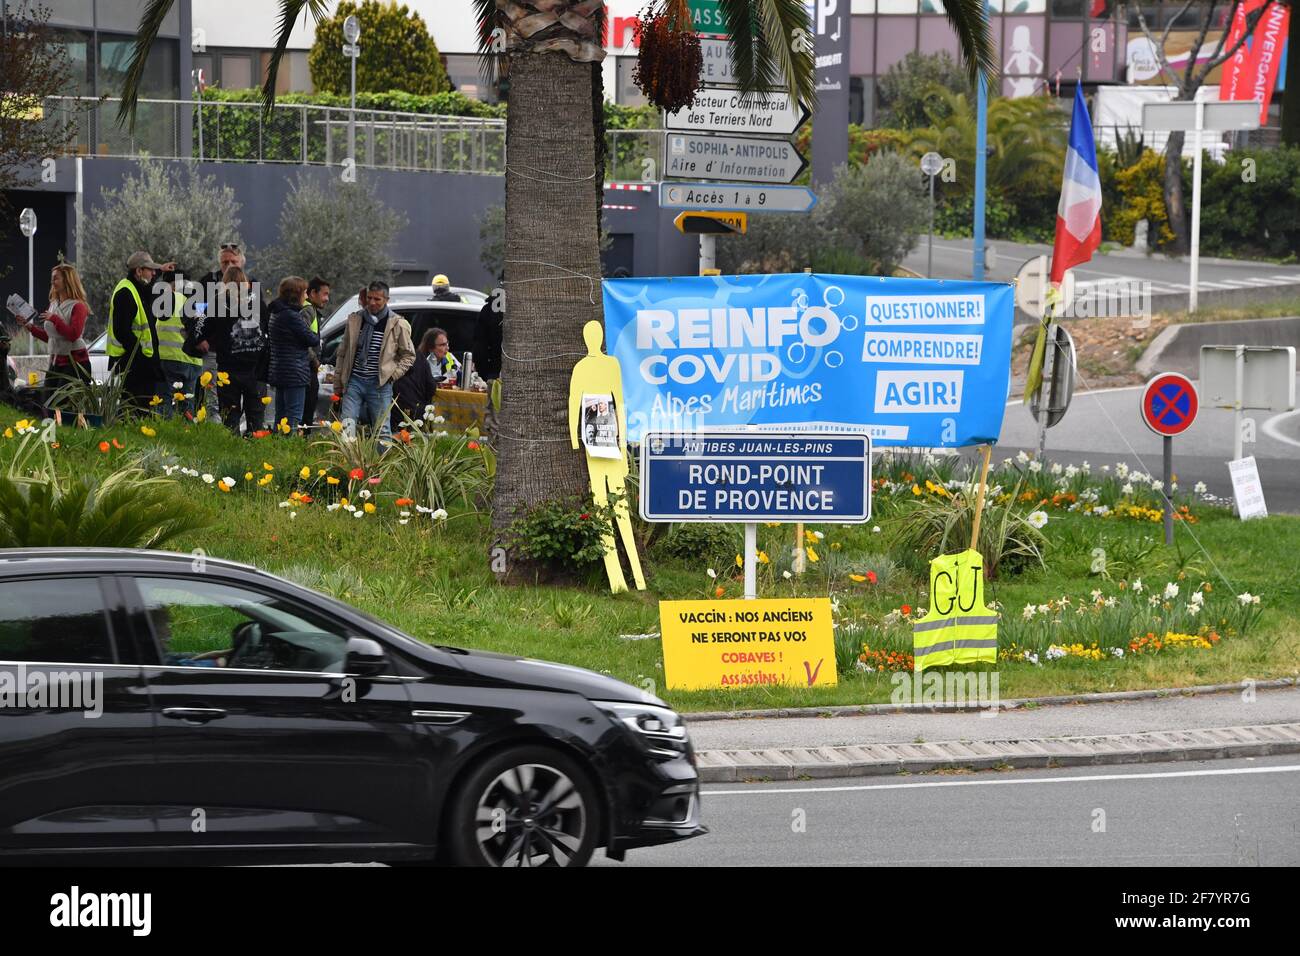 Demonstration of yellow vests on the Rond-Point de Provence in Antibes,  France, on April 10, 2021. Photo by Lionel Urman/ABACAPRESS.COM Stock Photo  - Alamy